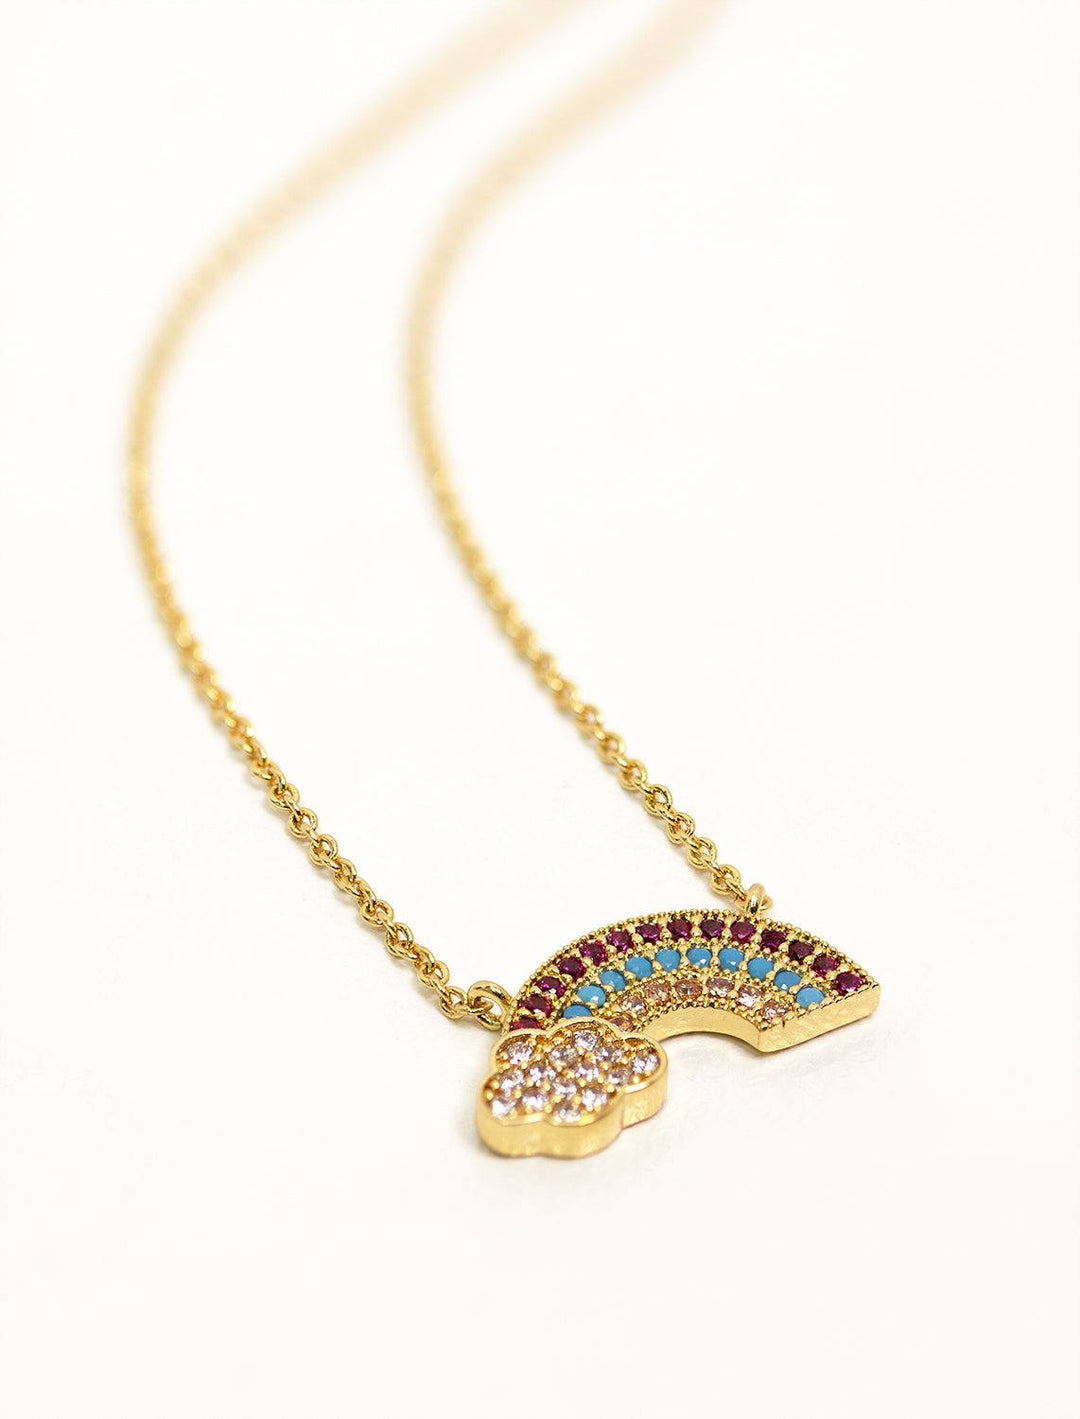 Tai jewelry's rainbow and cloud pave cz necklace in gold.